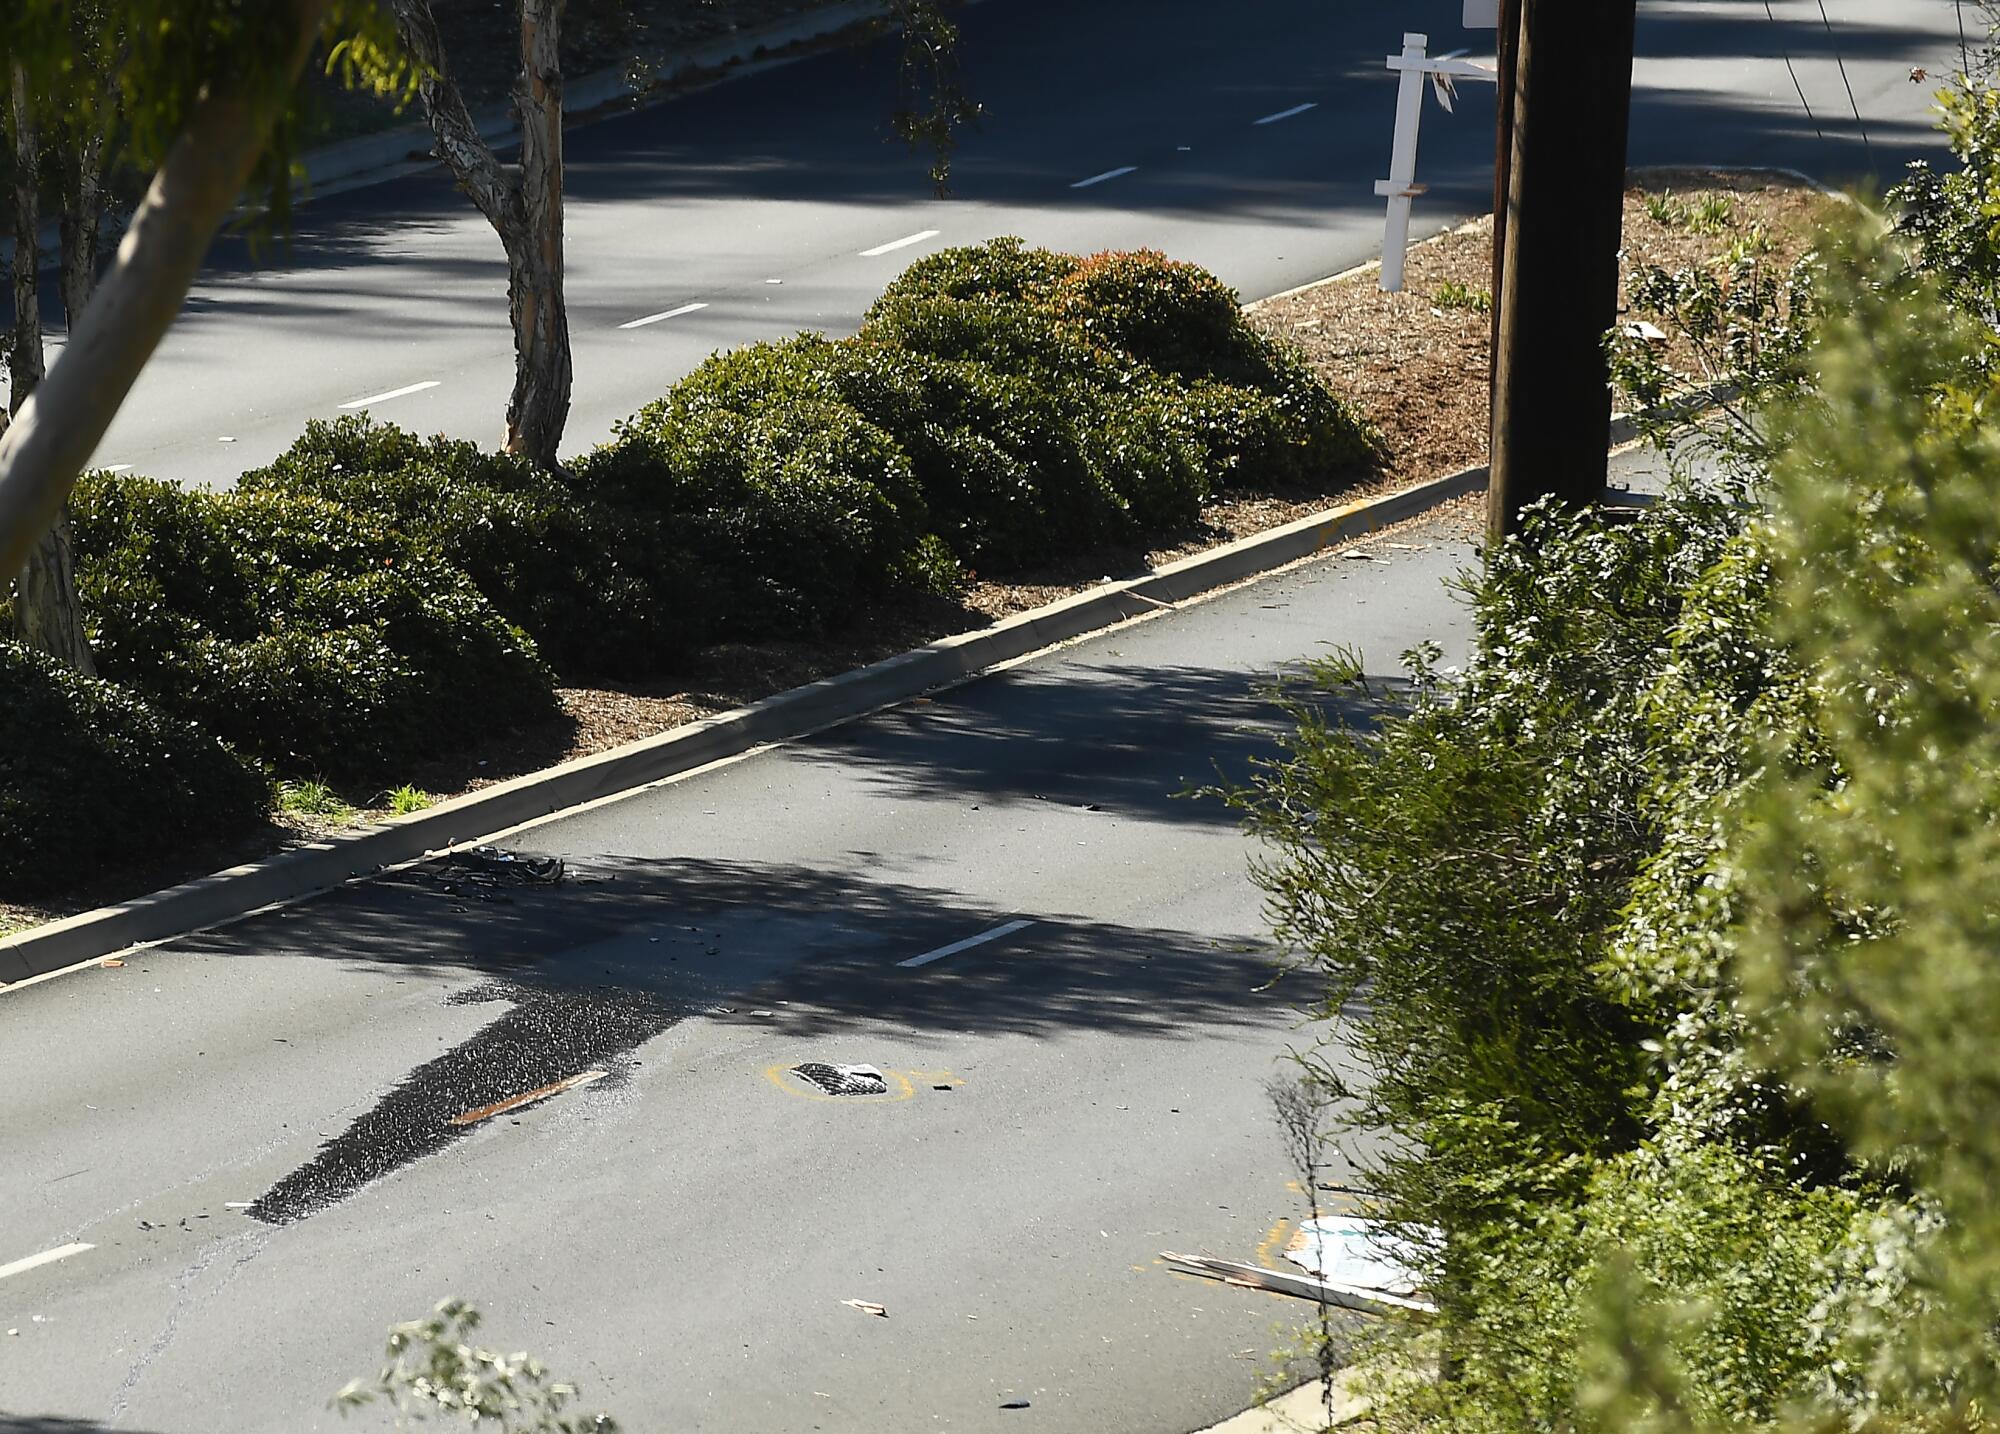 The point of impact of an accident involving golfer Tiger Woods along Hawthorne Blvd. in Ranch Palos Verdes Tuesday.